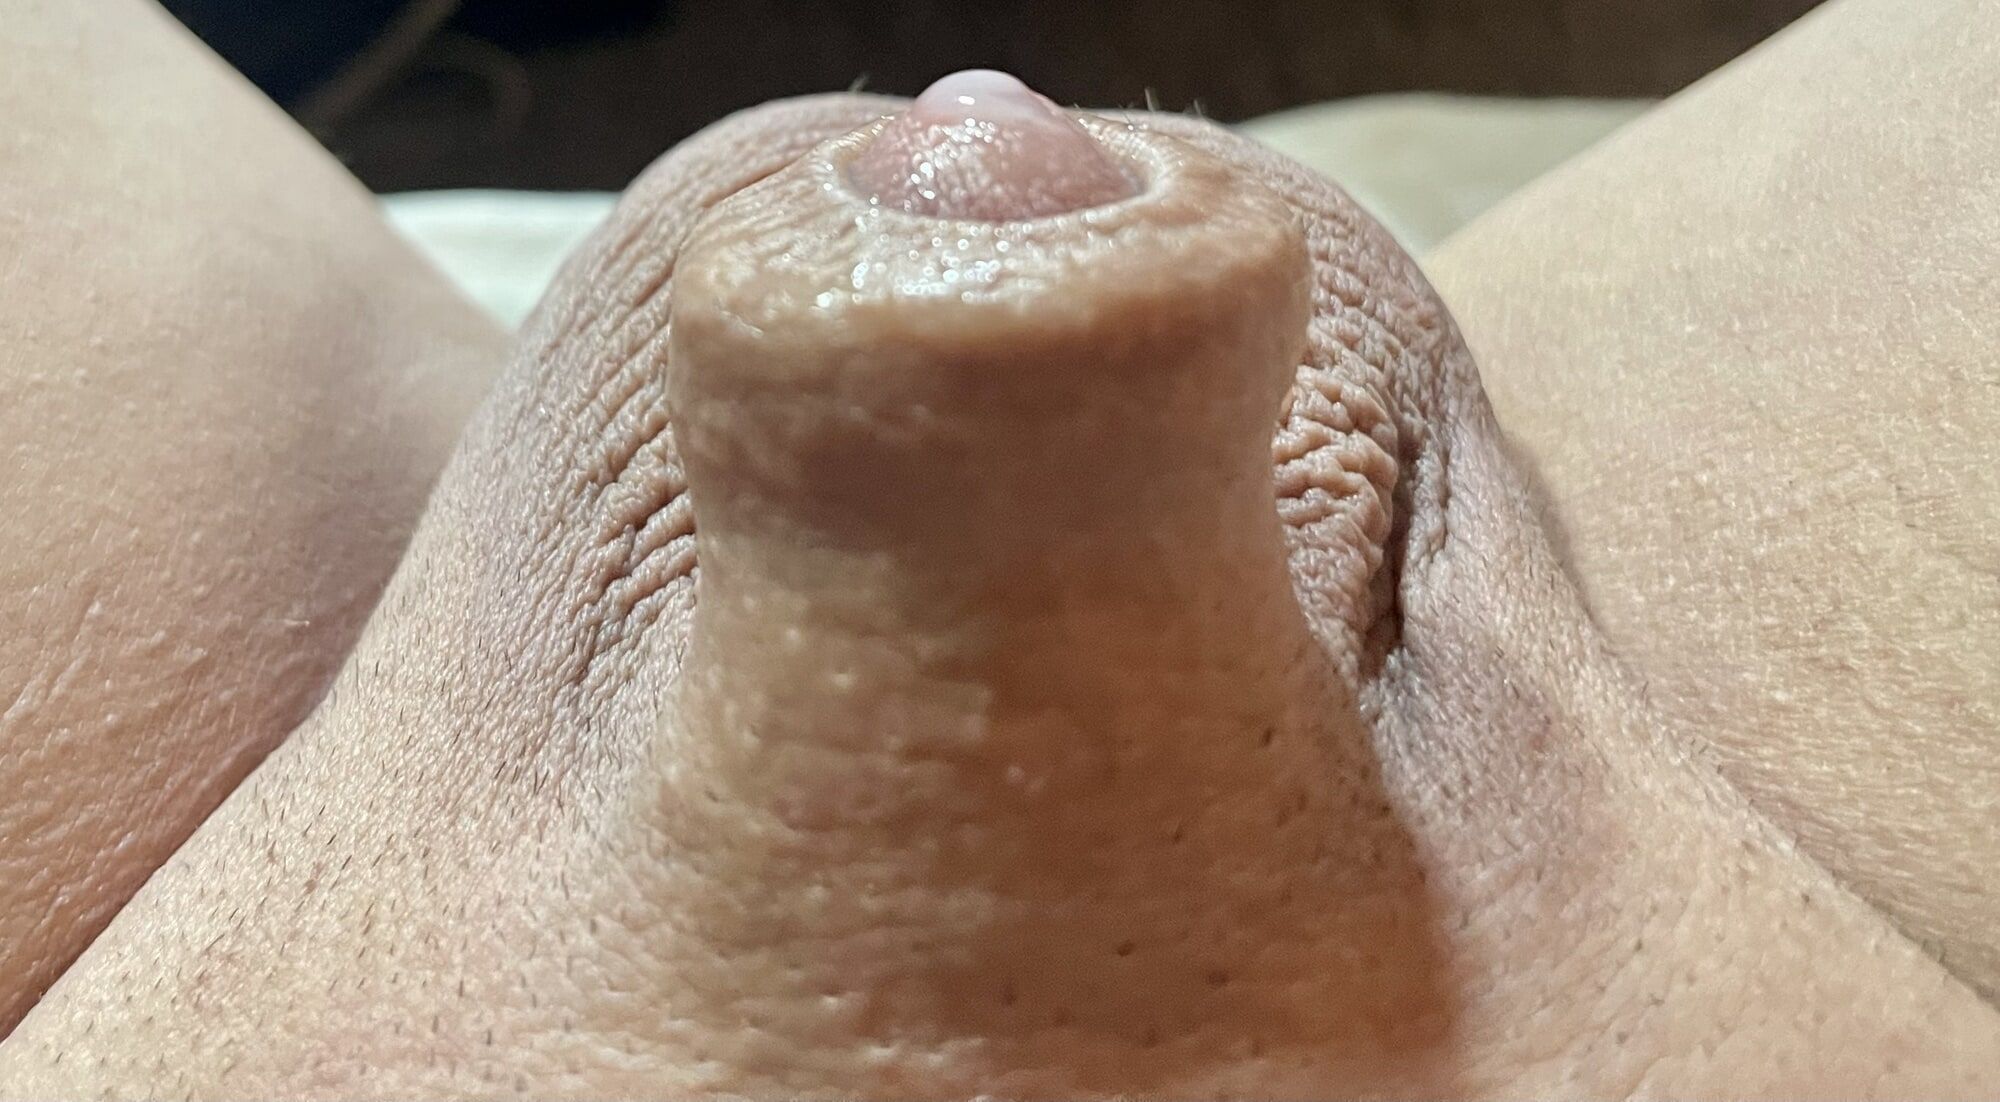 Tiny micro cock my little one inch bitch dick #8